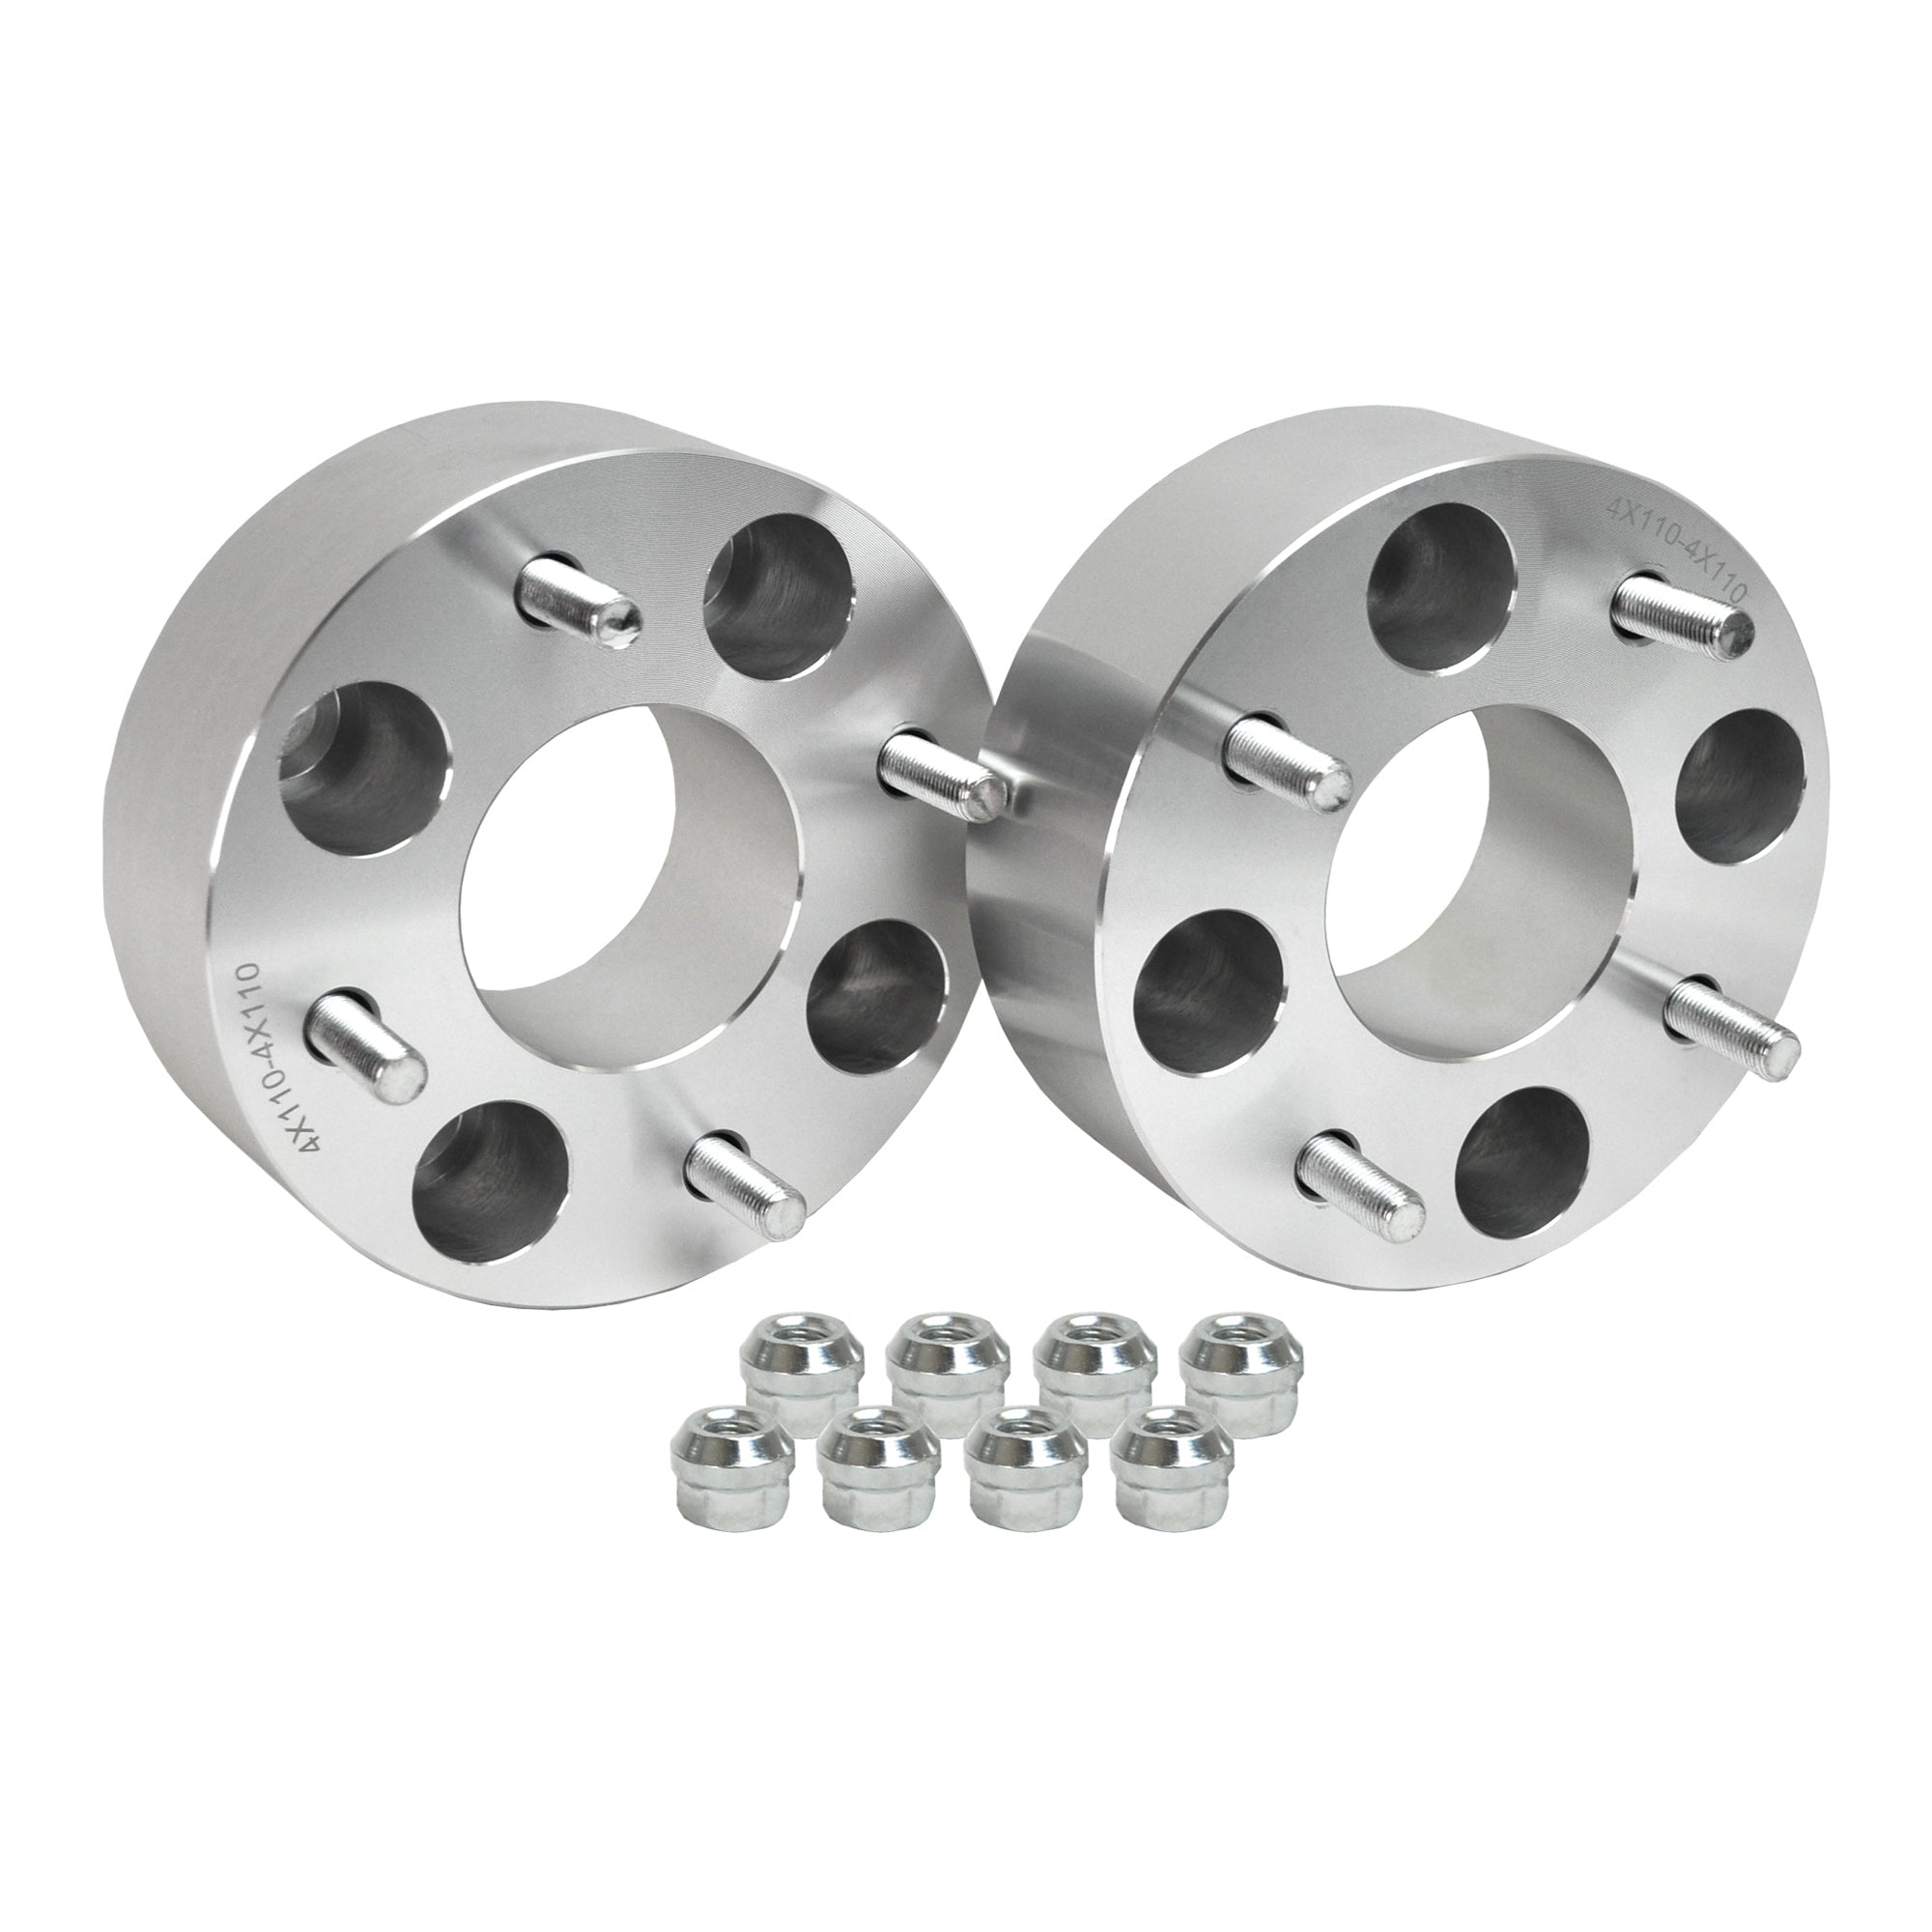 Wheel Spacer for Yamaha Breeze 125 